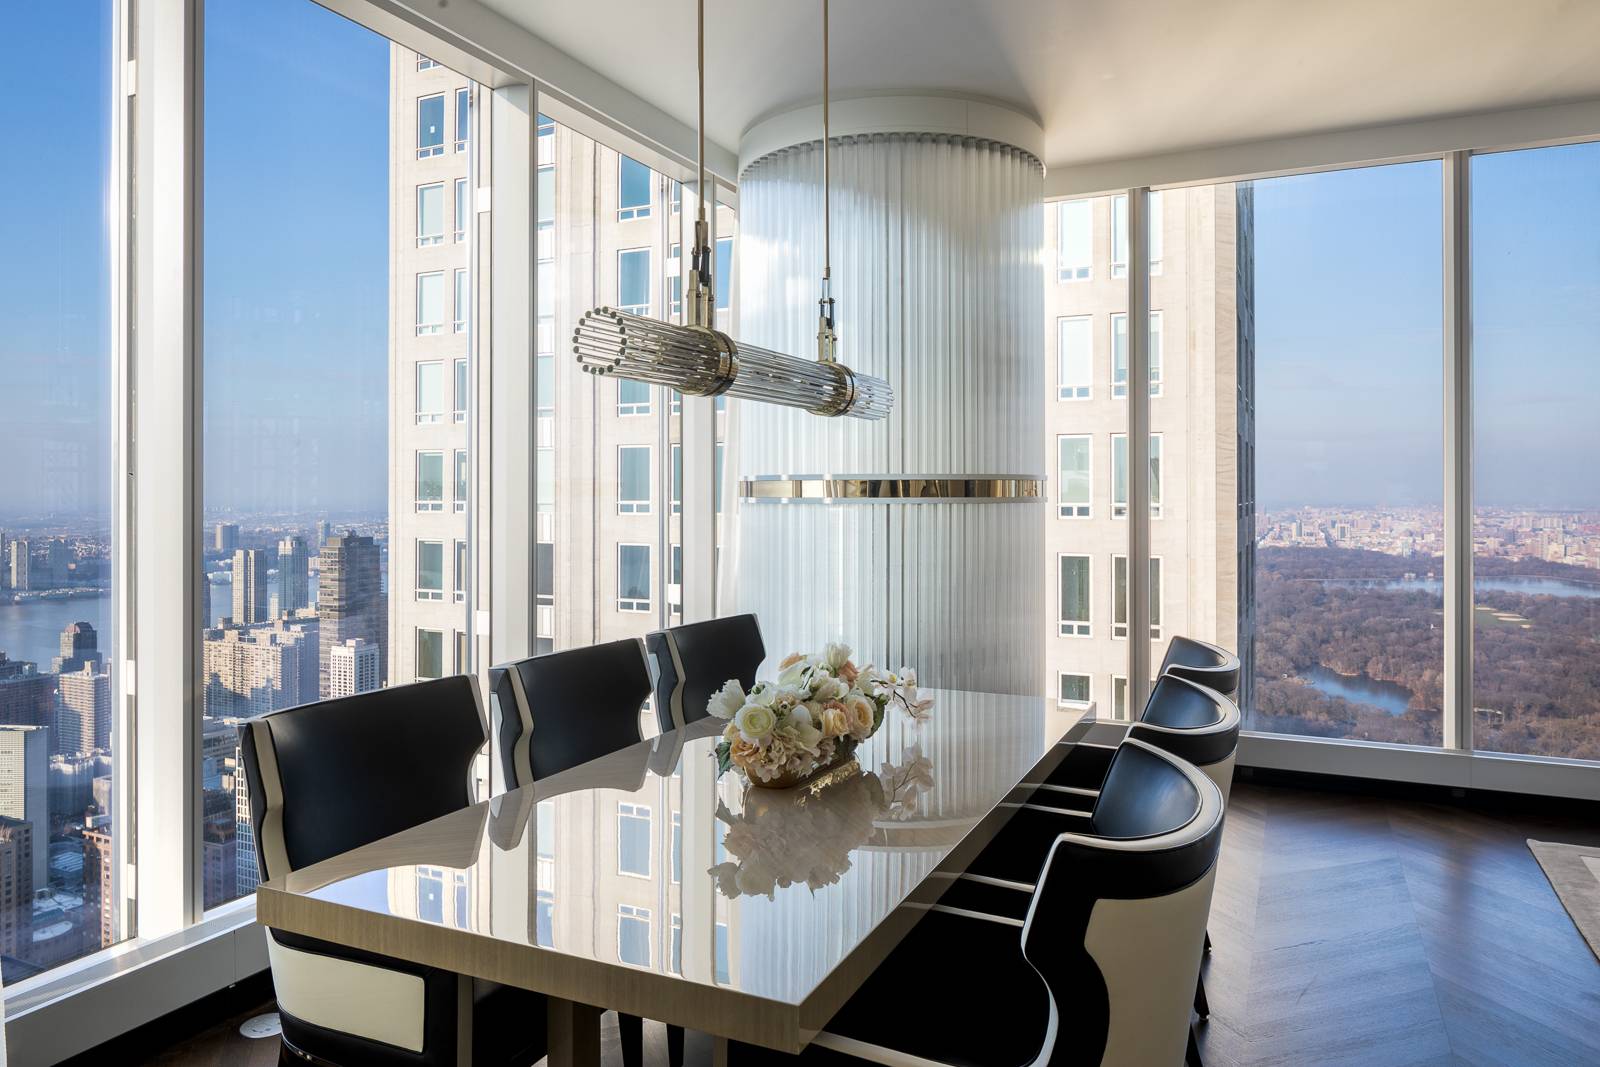 Reside over 700' above New York City in this residence at Central Park Tower.